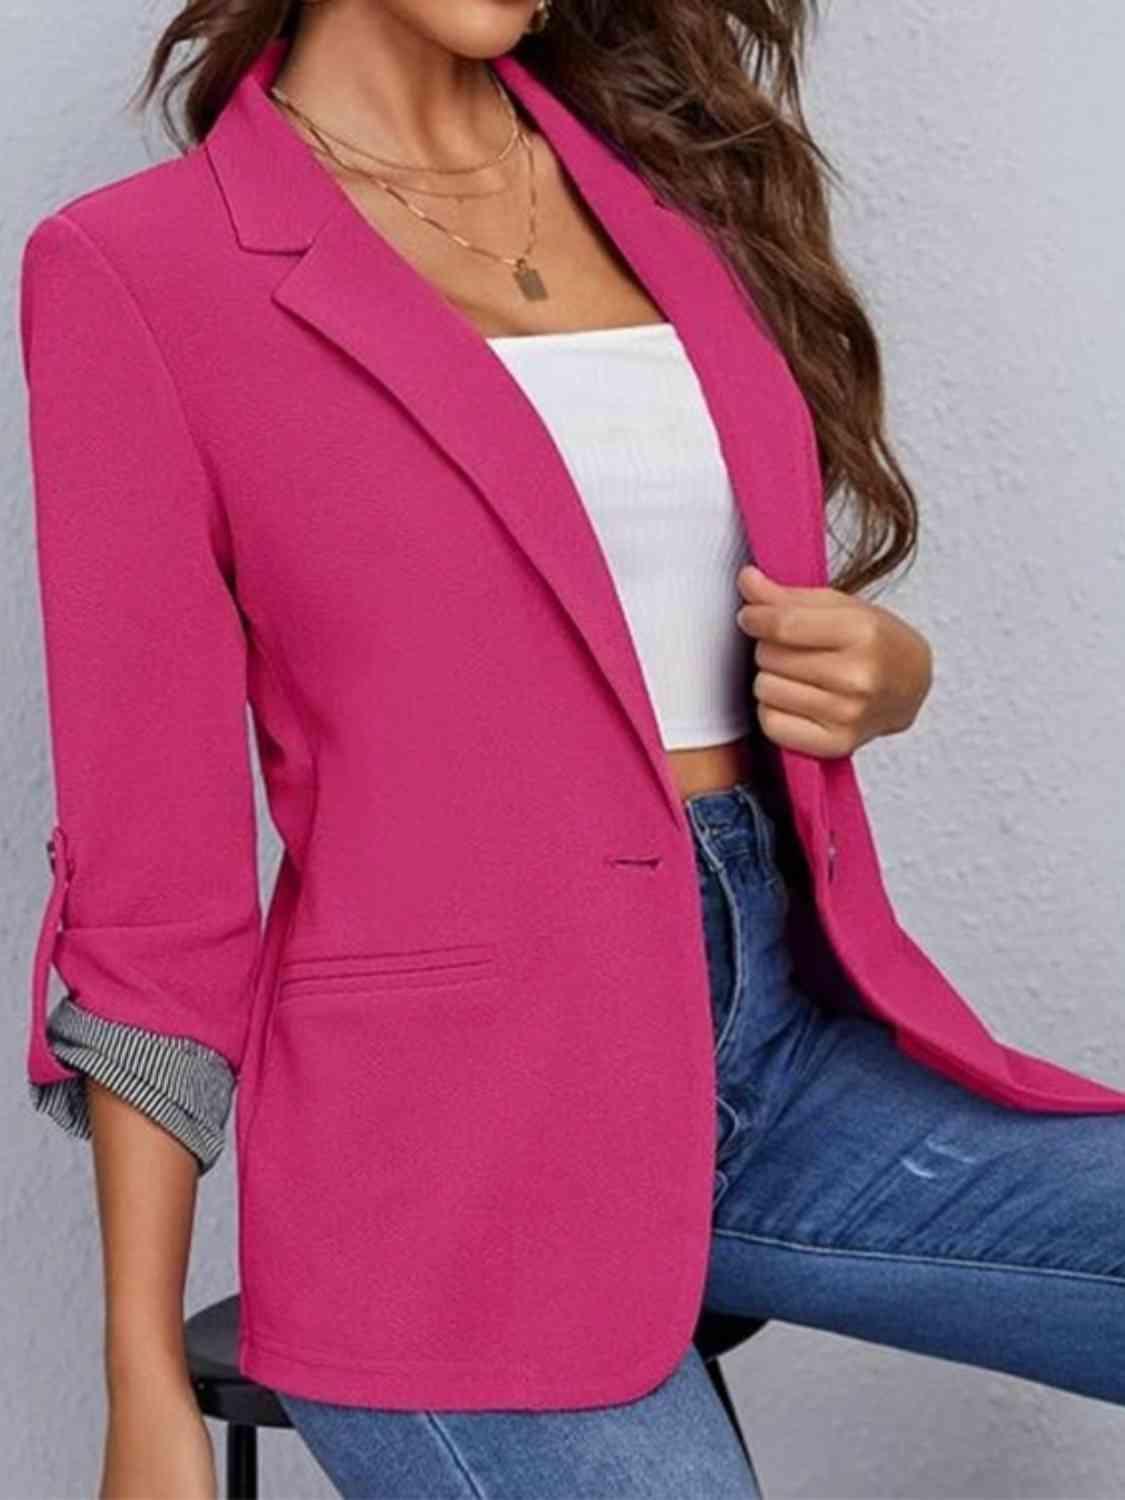 a woman sitting on a chair wearing a pink blazer